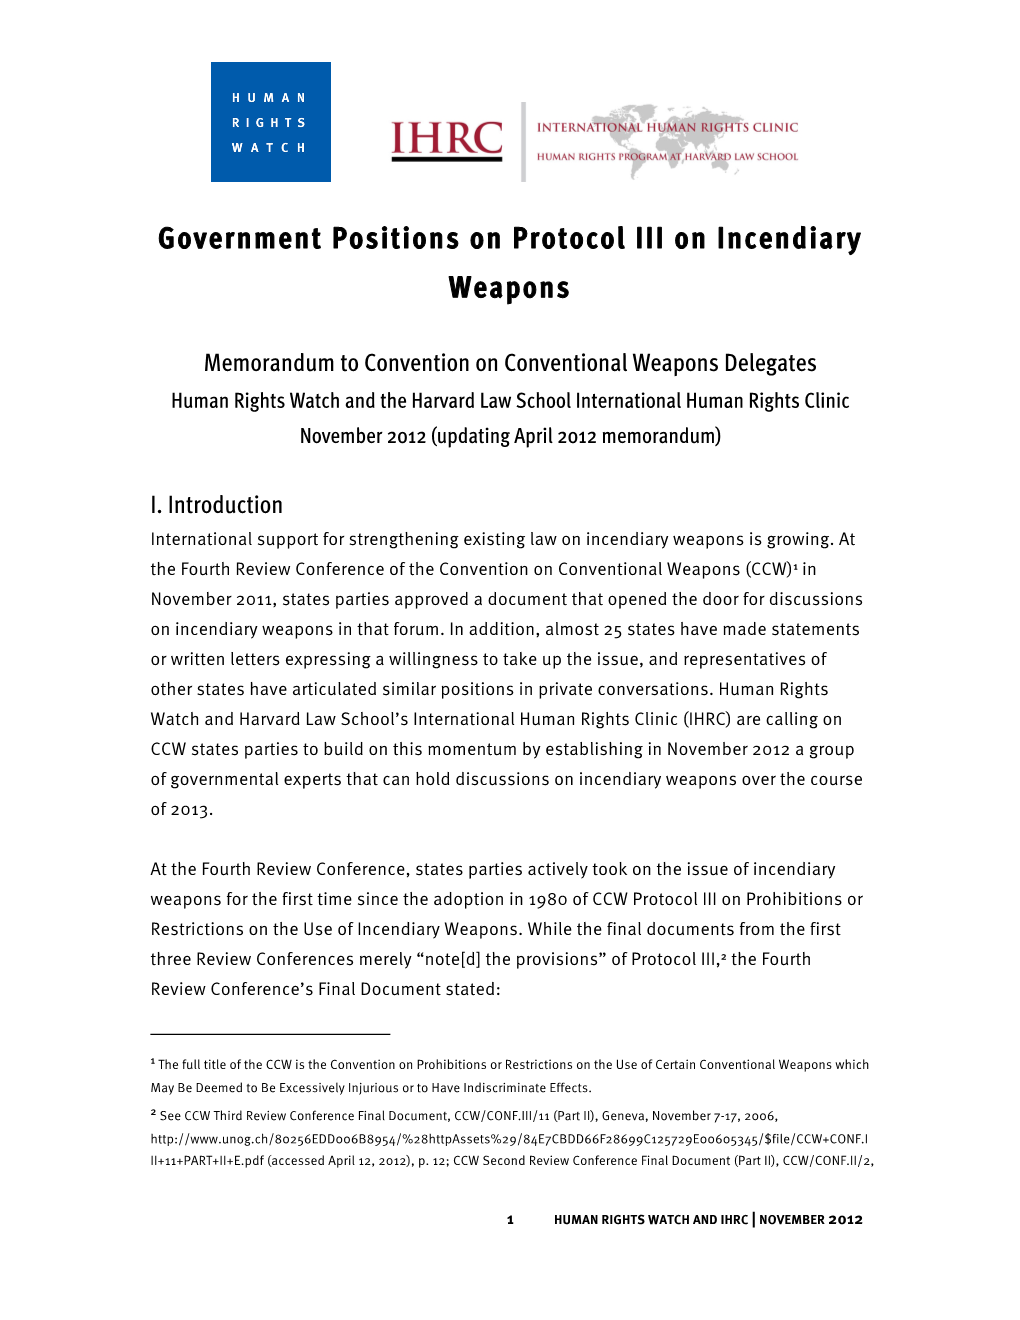 Government Positions on Protocol III on Incendiary Weapons